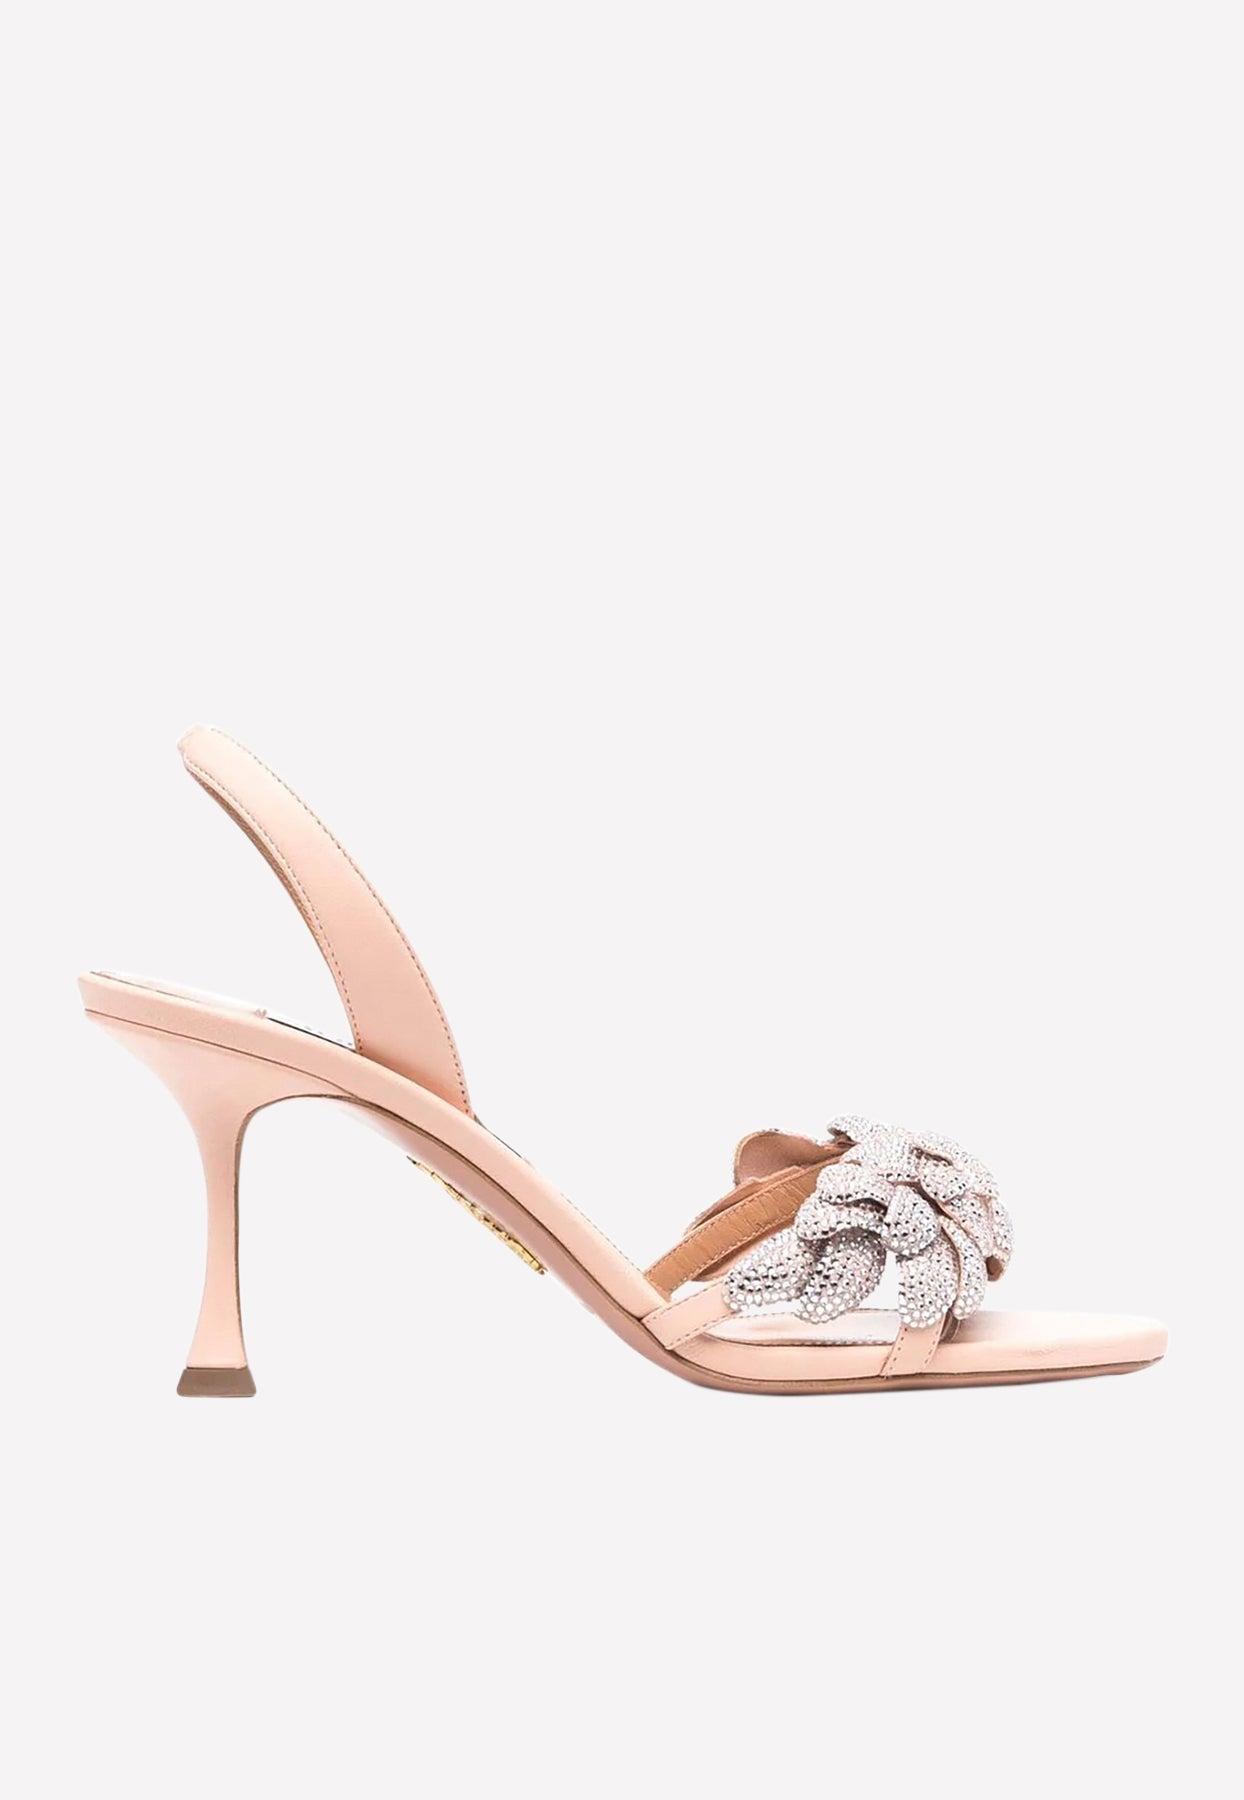 Aquazzura Galactic Flower 75 Leather Slingback Sandals in Natural | Lyst